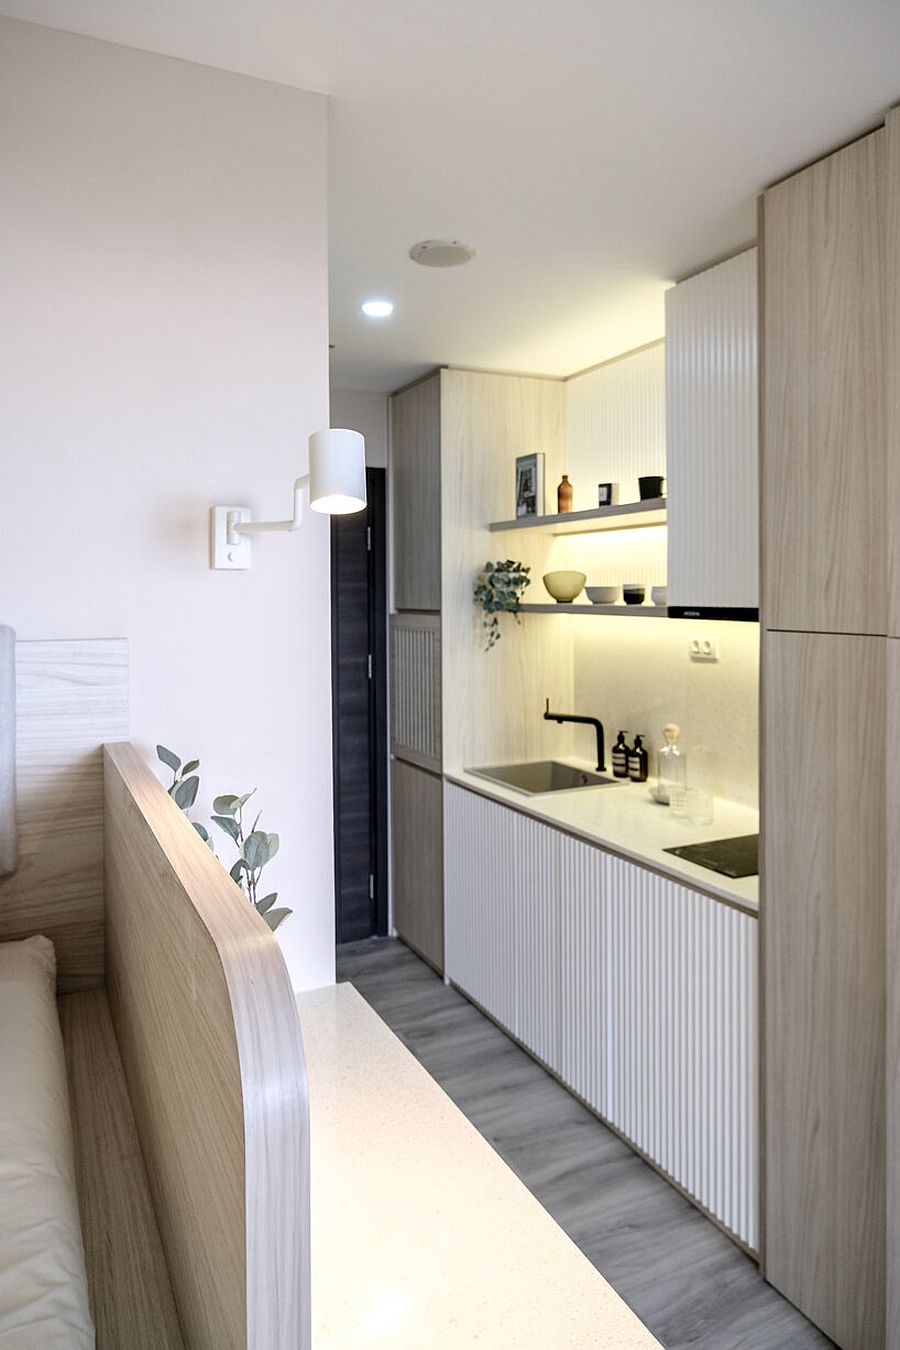 Ultra-small-single-wall-kitchen-at-the-start-of-the-apartment-79269